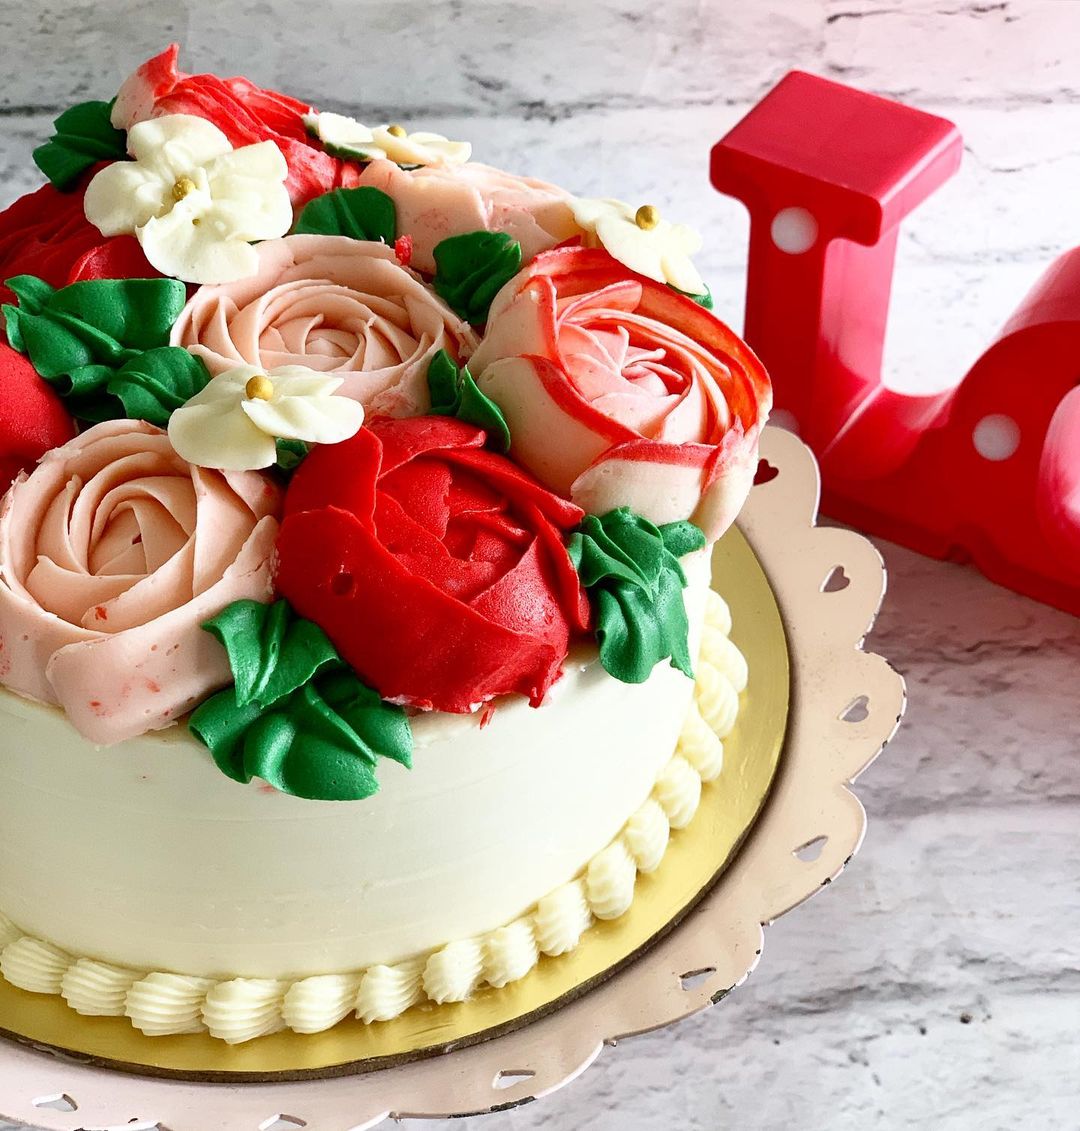 Adorable Hearts Anniversary Day Cake Idea With Name